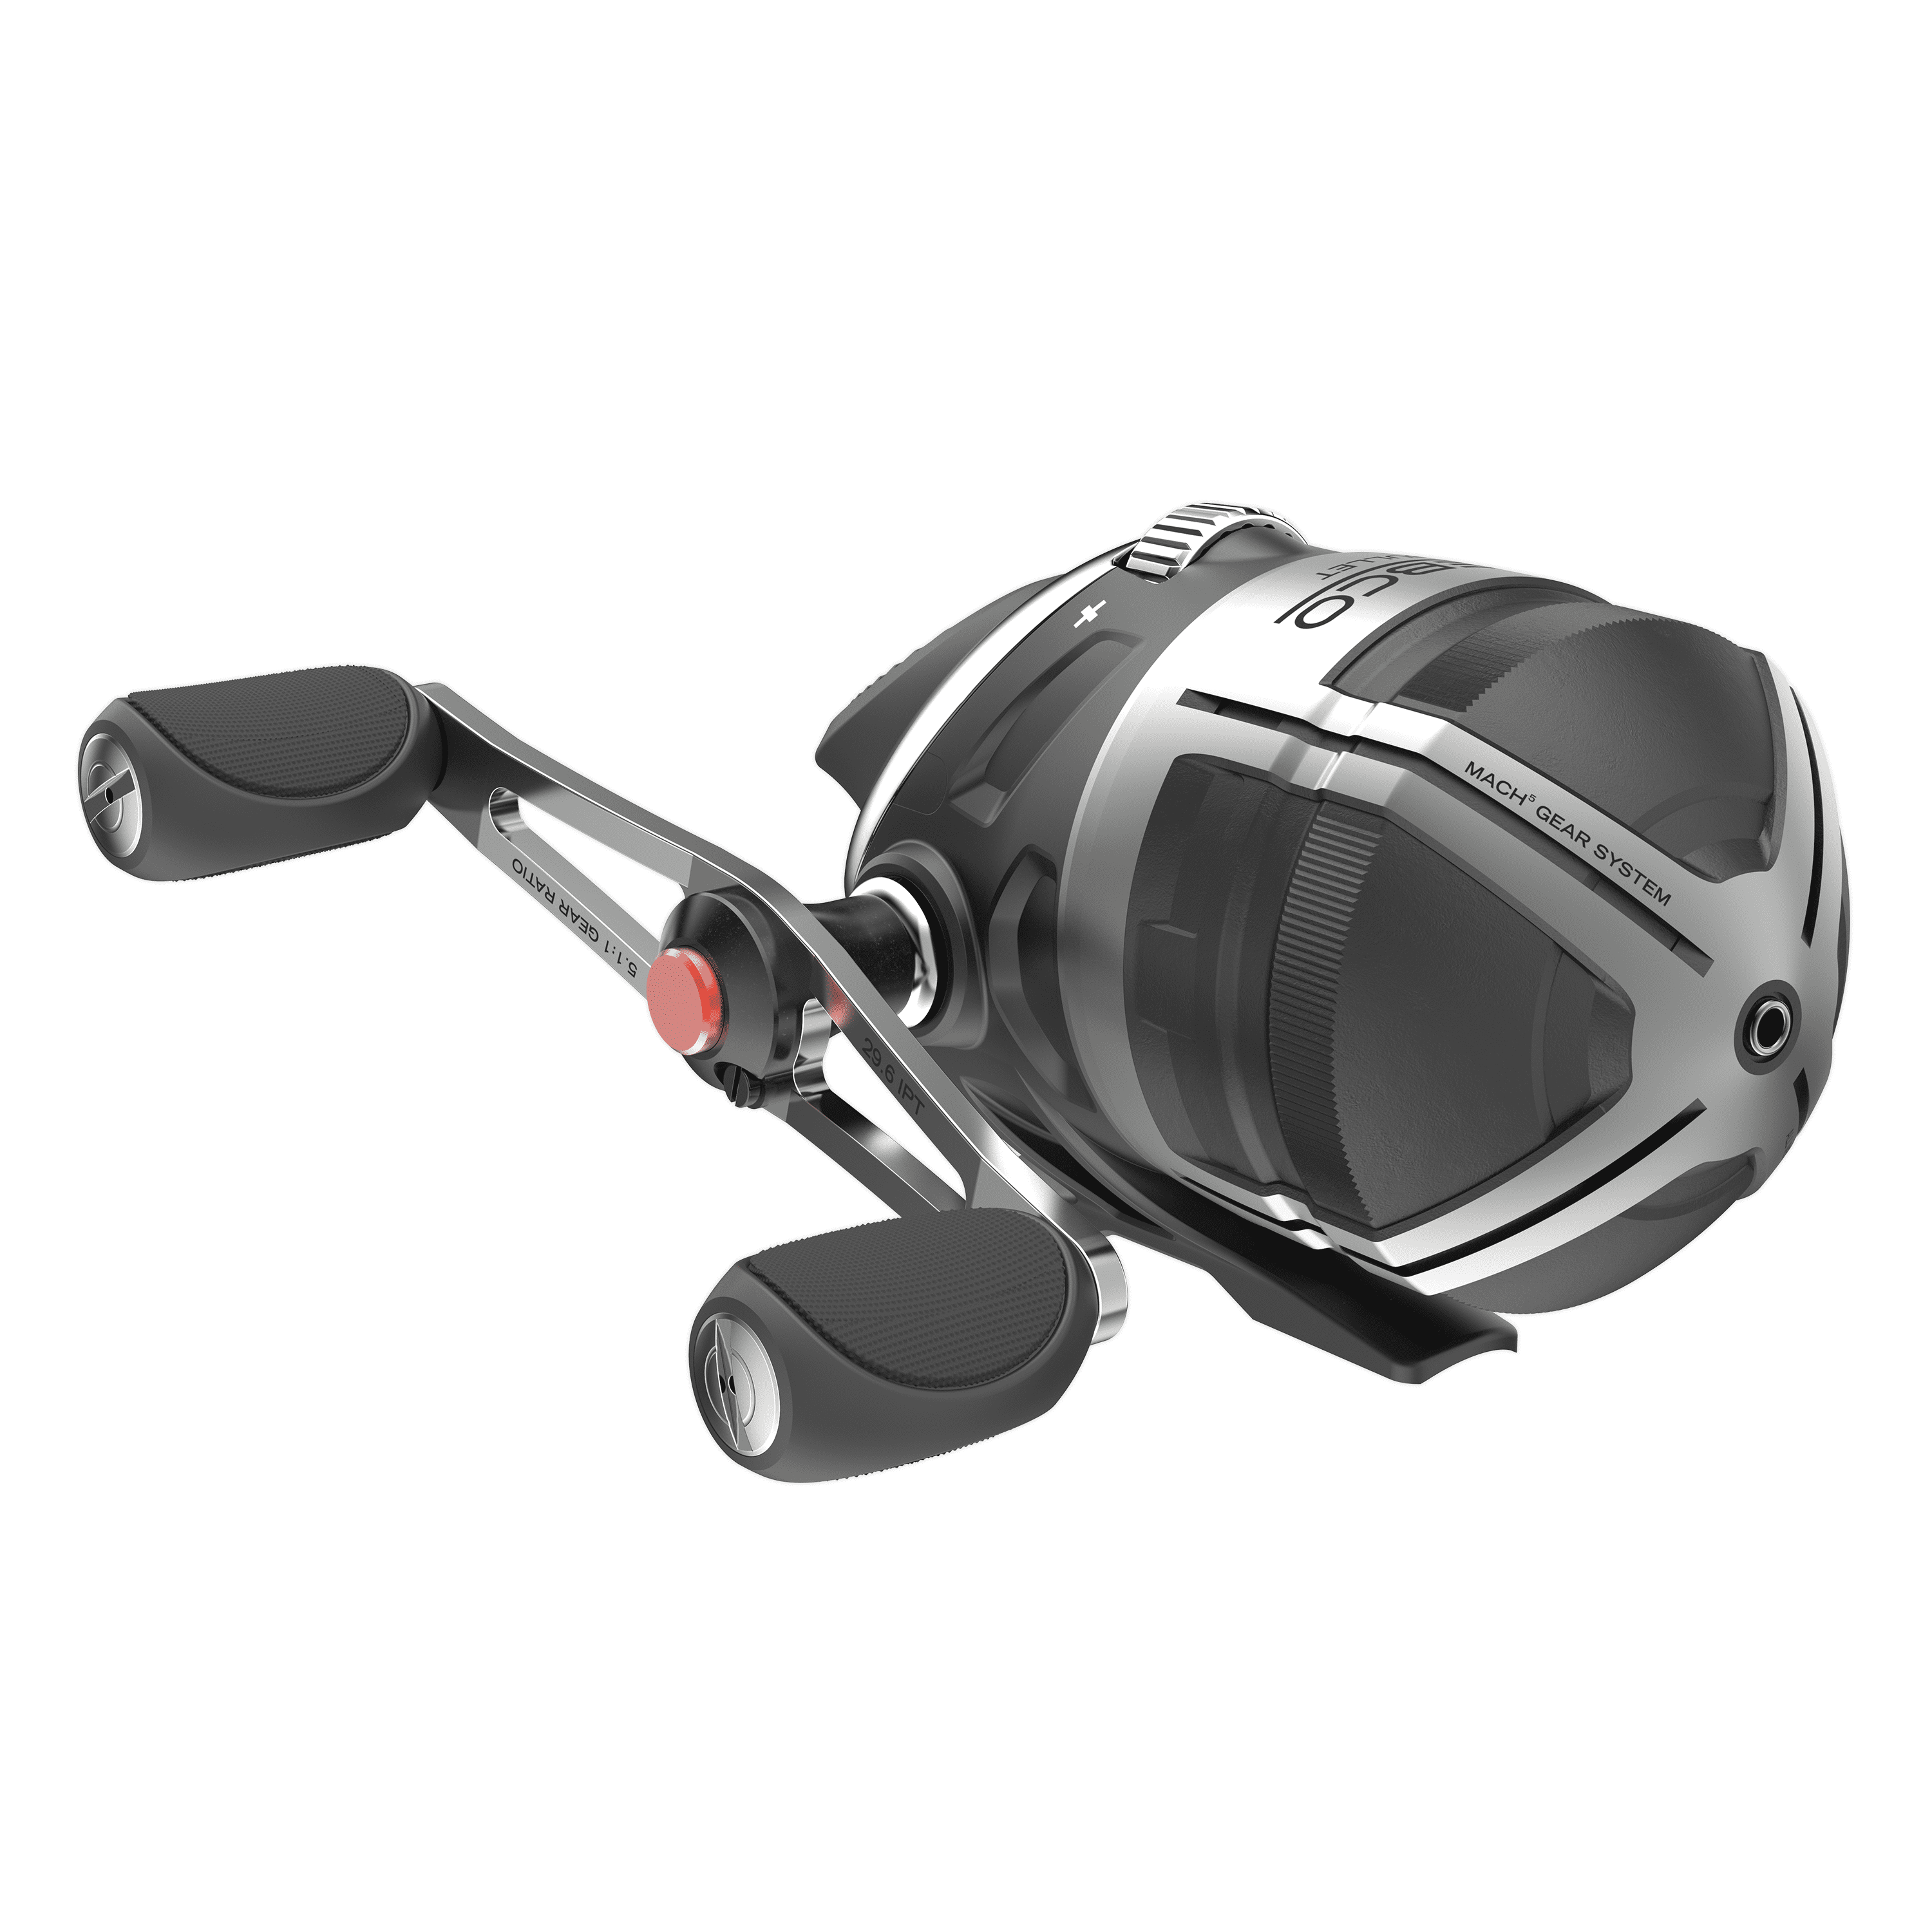 Top 5 Best Closed Face Reels for Left/Right Retrieve Review 2022